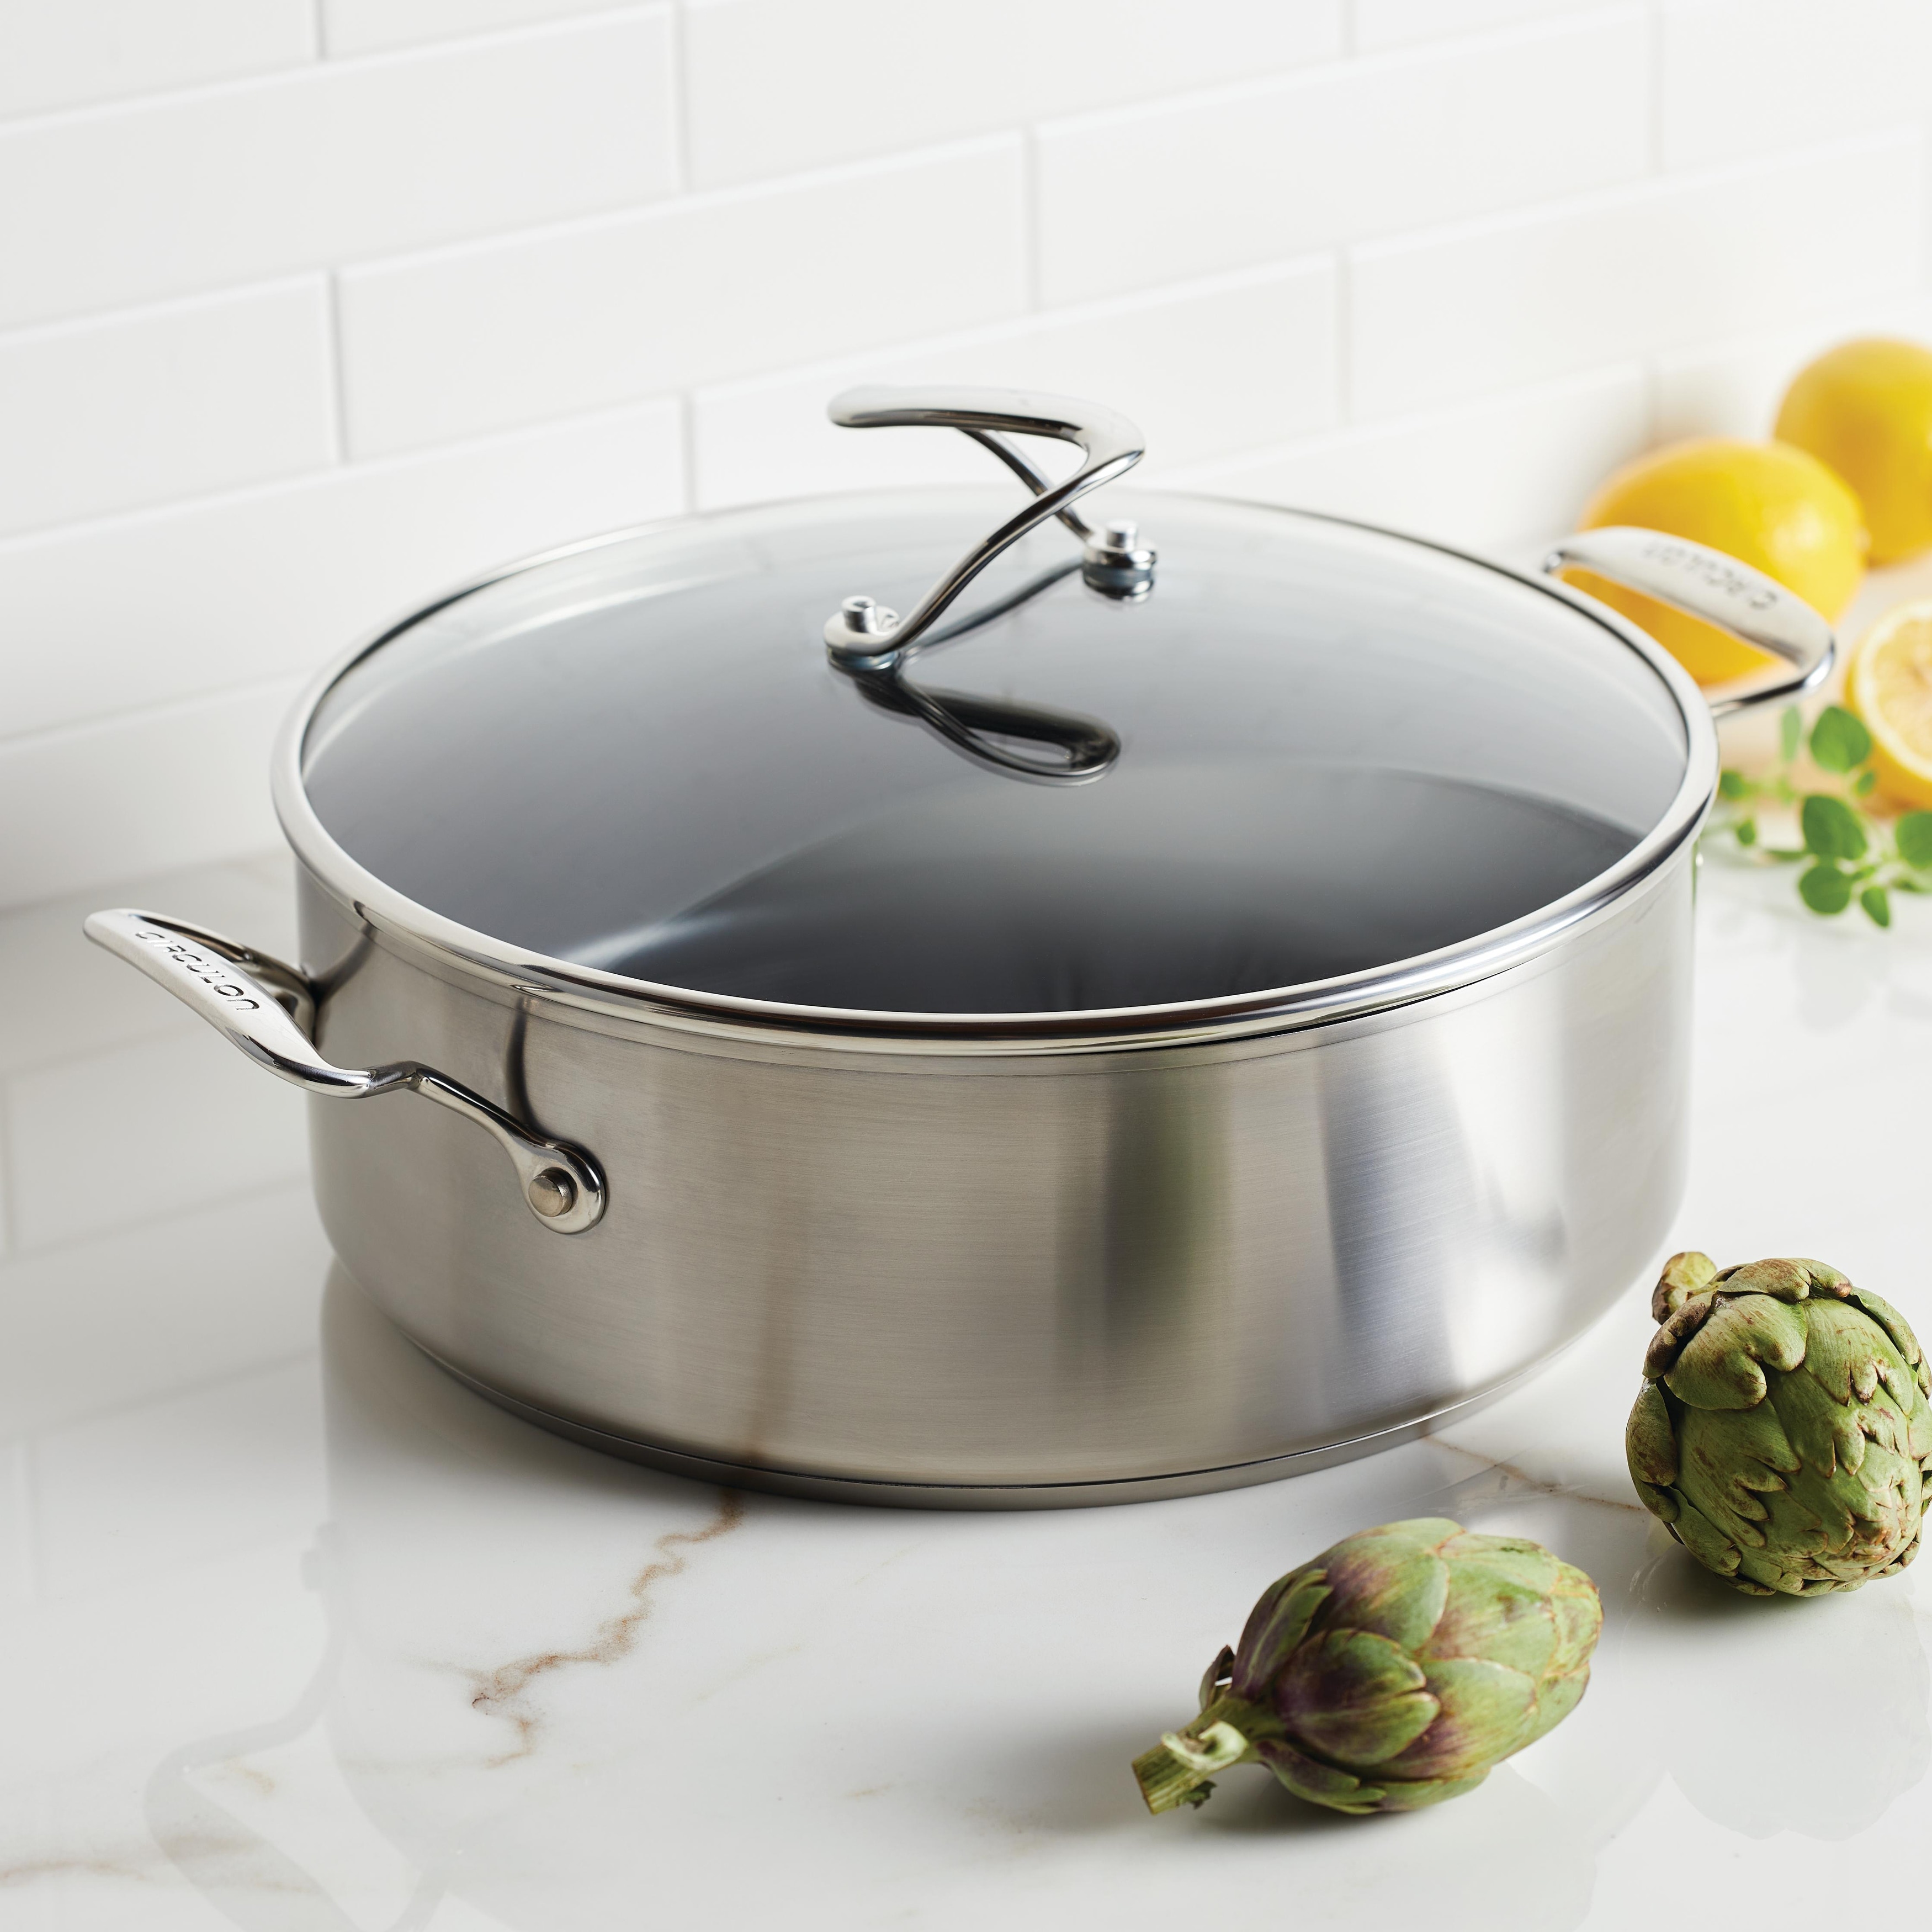 https://ak1.ostkcdn.com/images/products/is/images/direct/b4d6801f74671a4940523612d20d7c424be1c6e4/Circulon-Stainless-Steel-Induction-Stockpot-with-Lid-and-SteelShield-Hybrid-Stainless-and-Nonstick-Technology%2C-7.5-Quart%2C-Silver.jpg